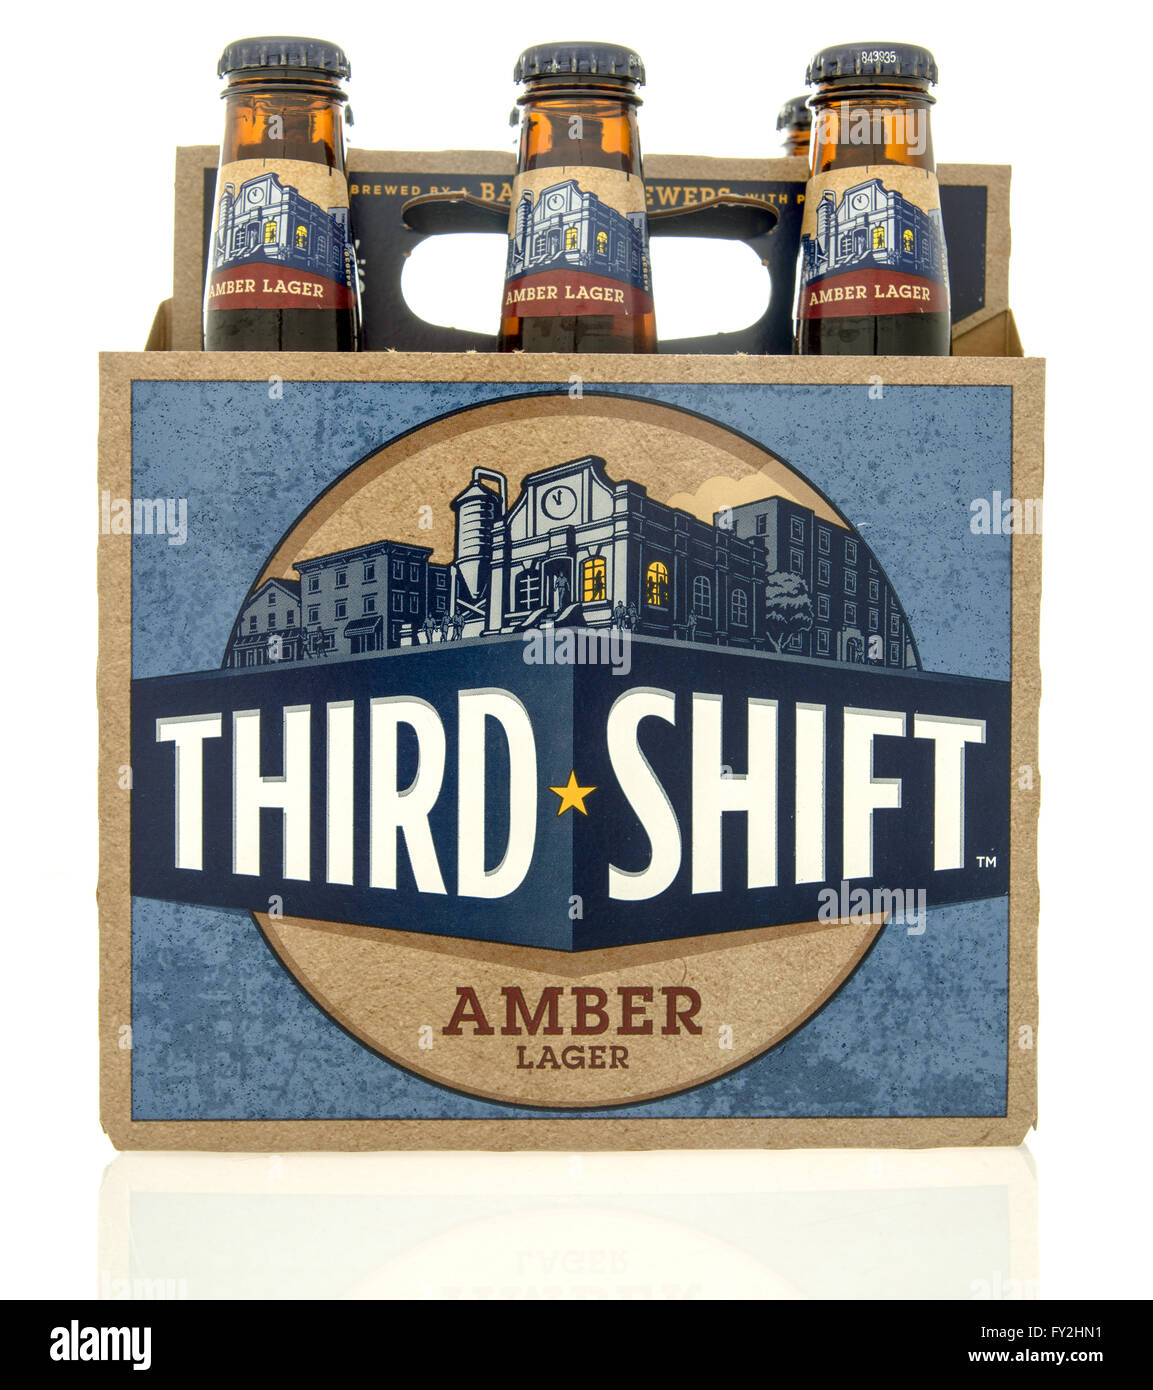 Winneconne, WI - 28 Nov 2015: Six pack of third shift beer Stock Photo -  Alamy